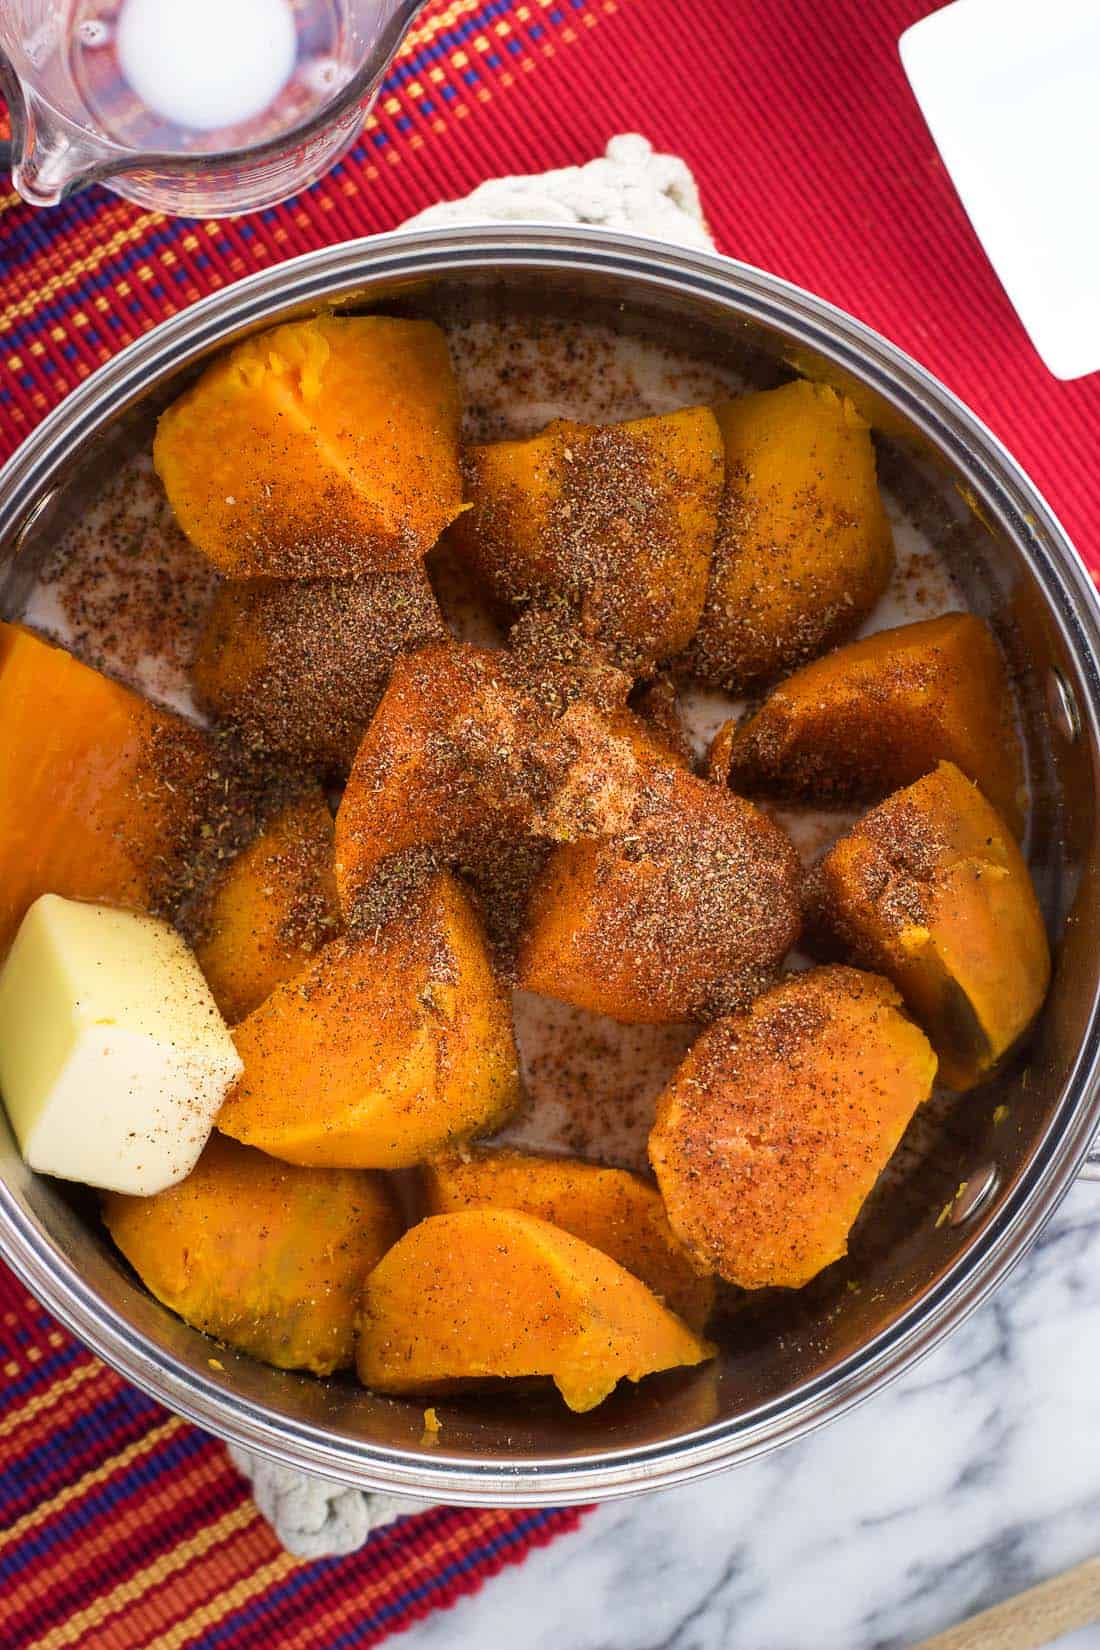 Sweet potato segments, butter, milk, and spices in a saucepan before mashing